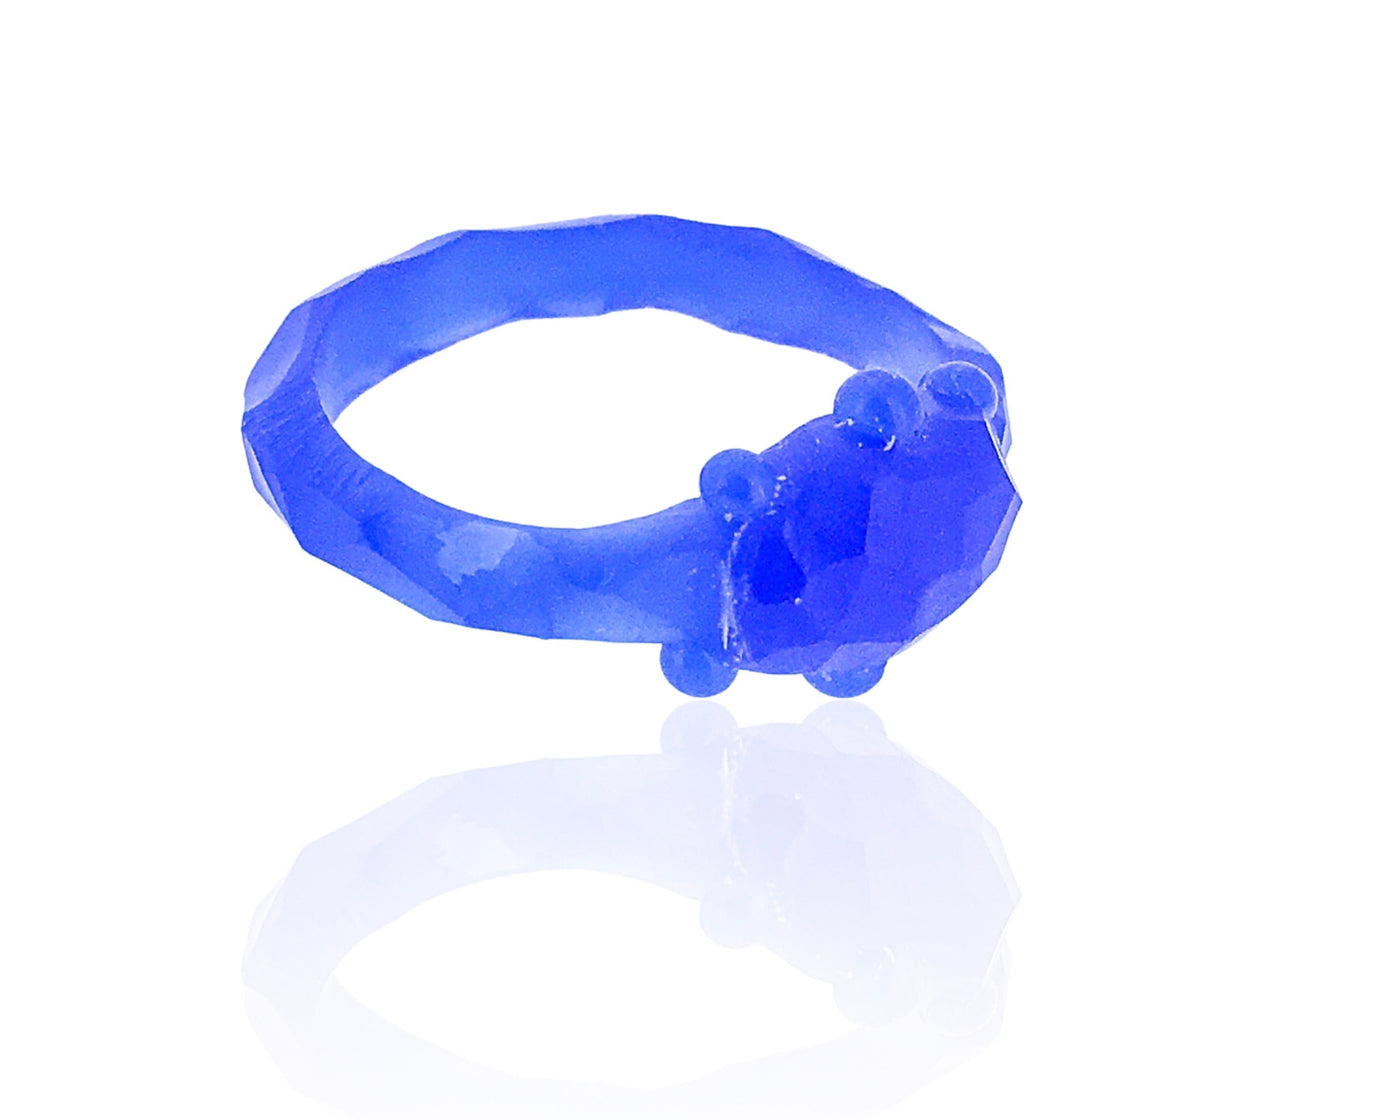 Wax Ring Workshop | Friday October 13th @ 6:30pm - Radical Giving 